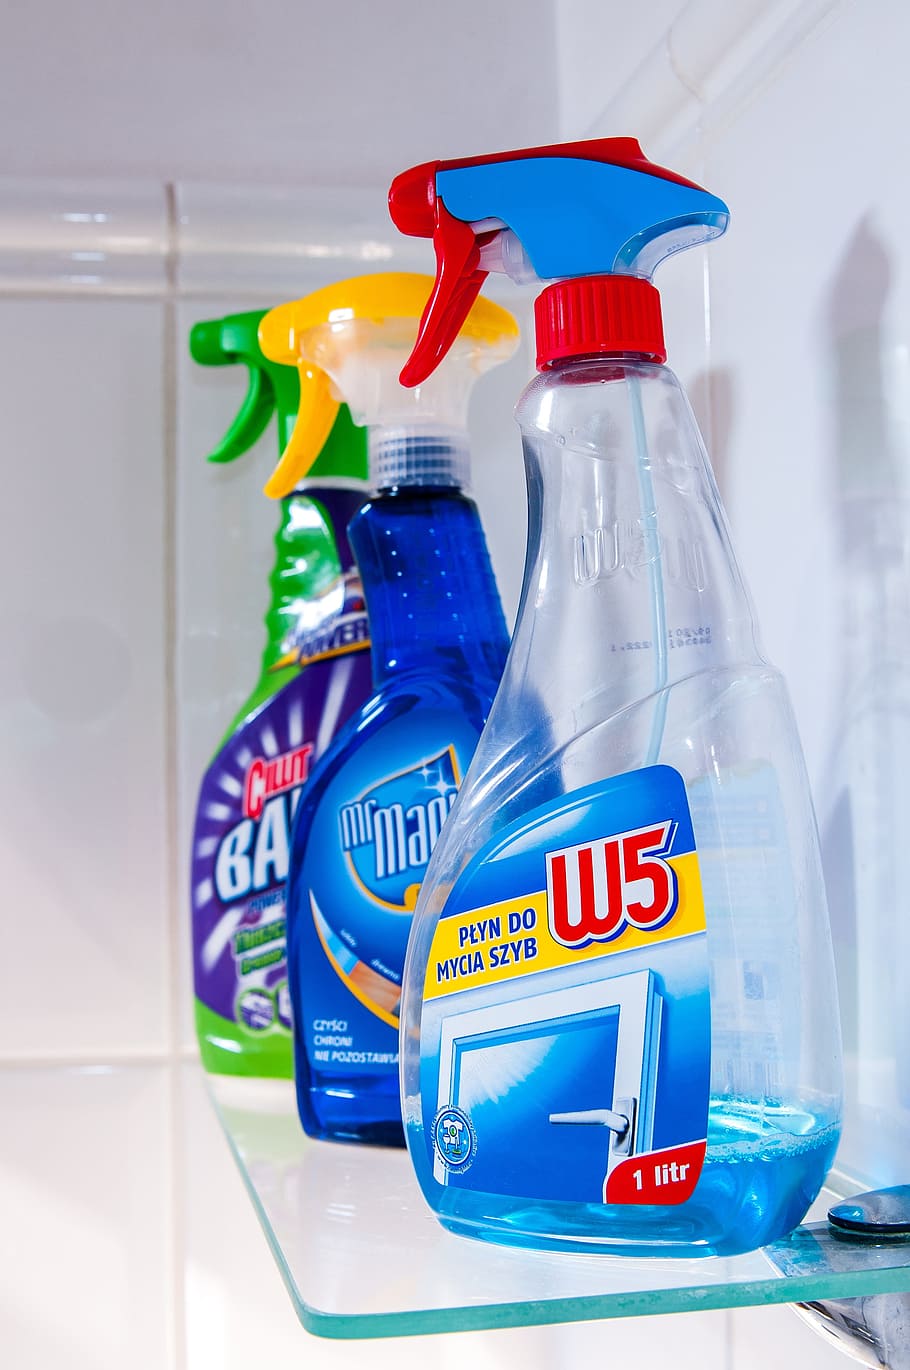 three, cleaning spray bottles, top, glass-top wall shelf, cleaning, equipment, spray, cleaning products, house cleaning, bottle